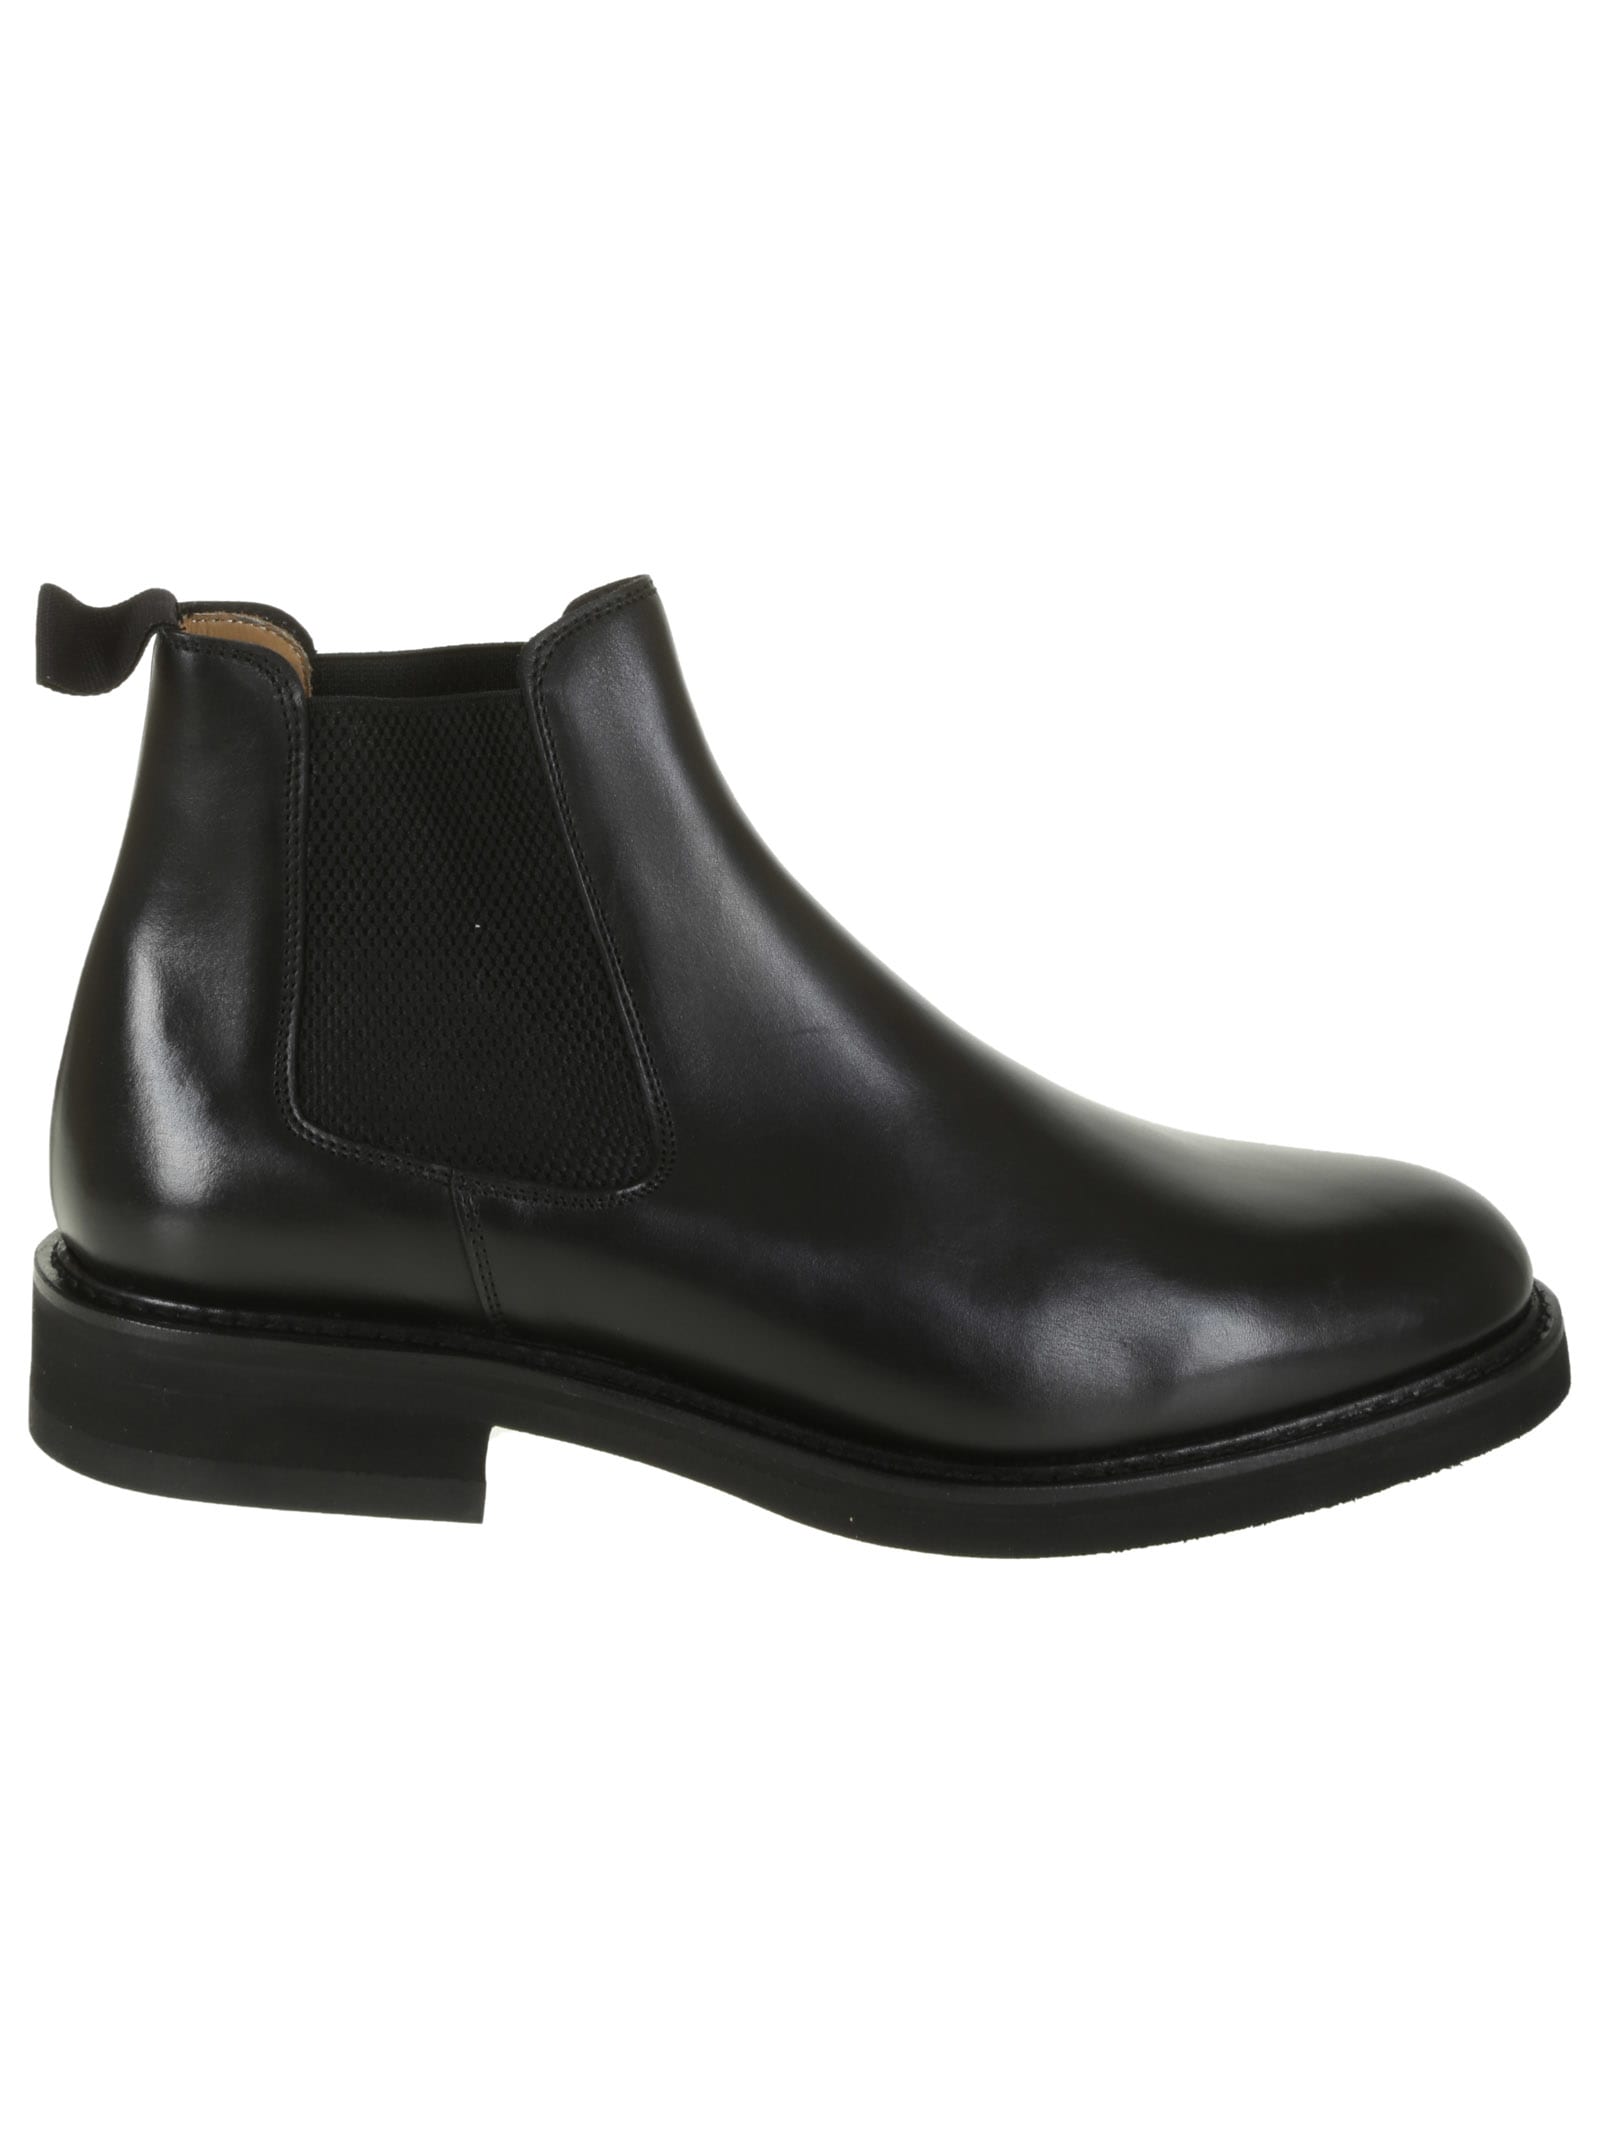 Berwick 1707 Boots In Chateaubriand Black